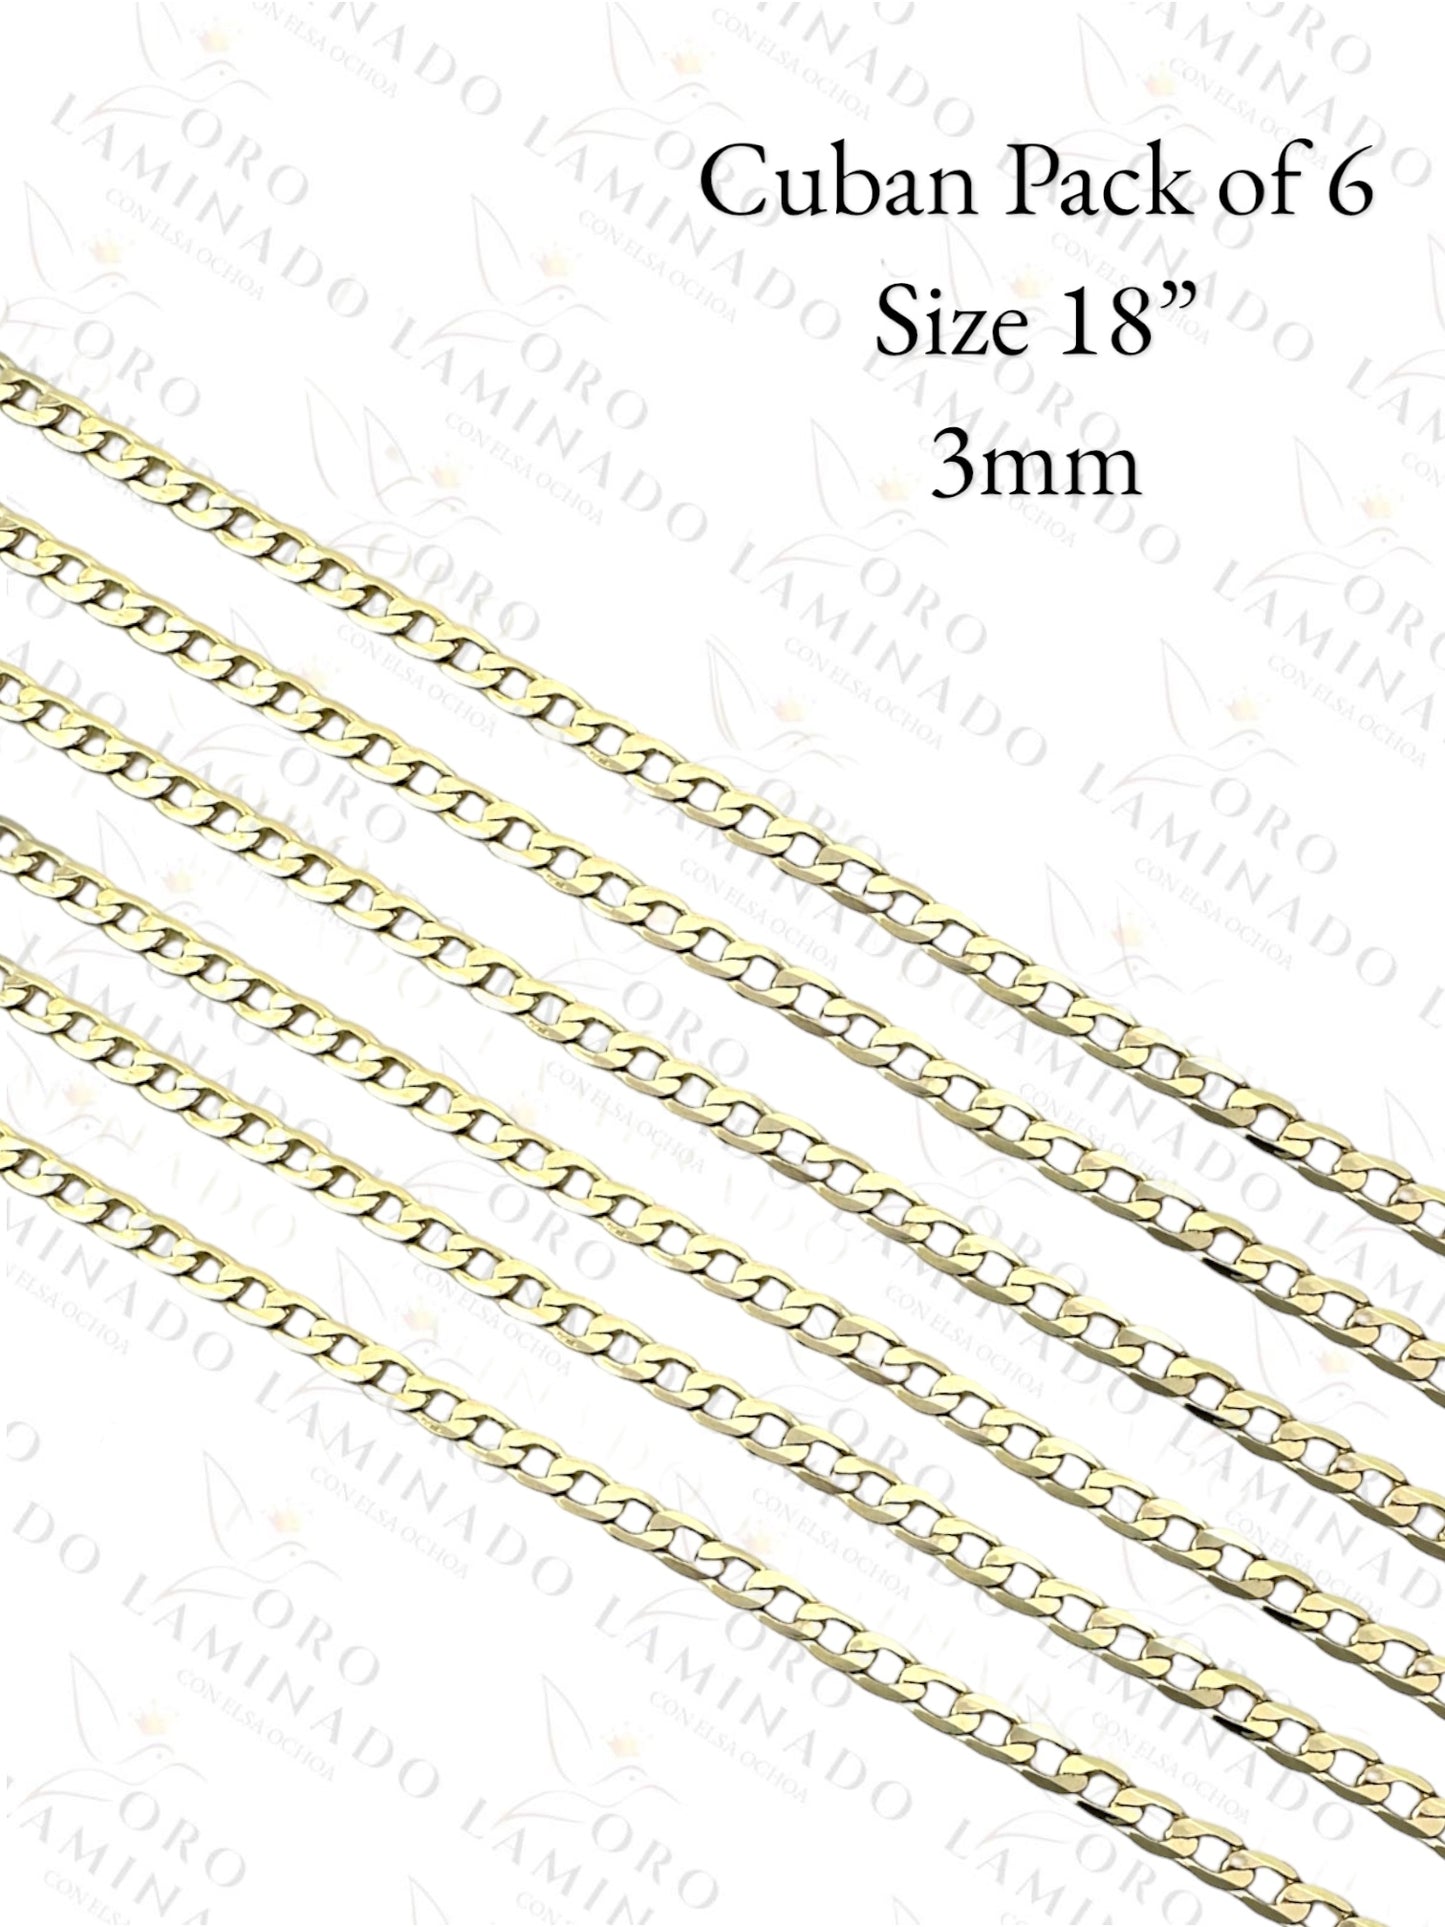 High Quality Cuban Pack of 6 Chains Size 18" 3mm B1